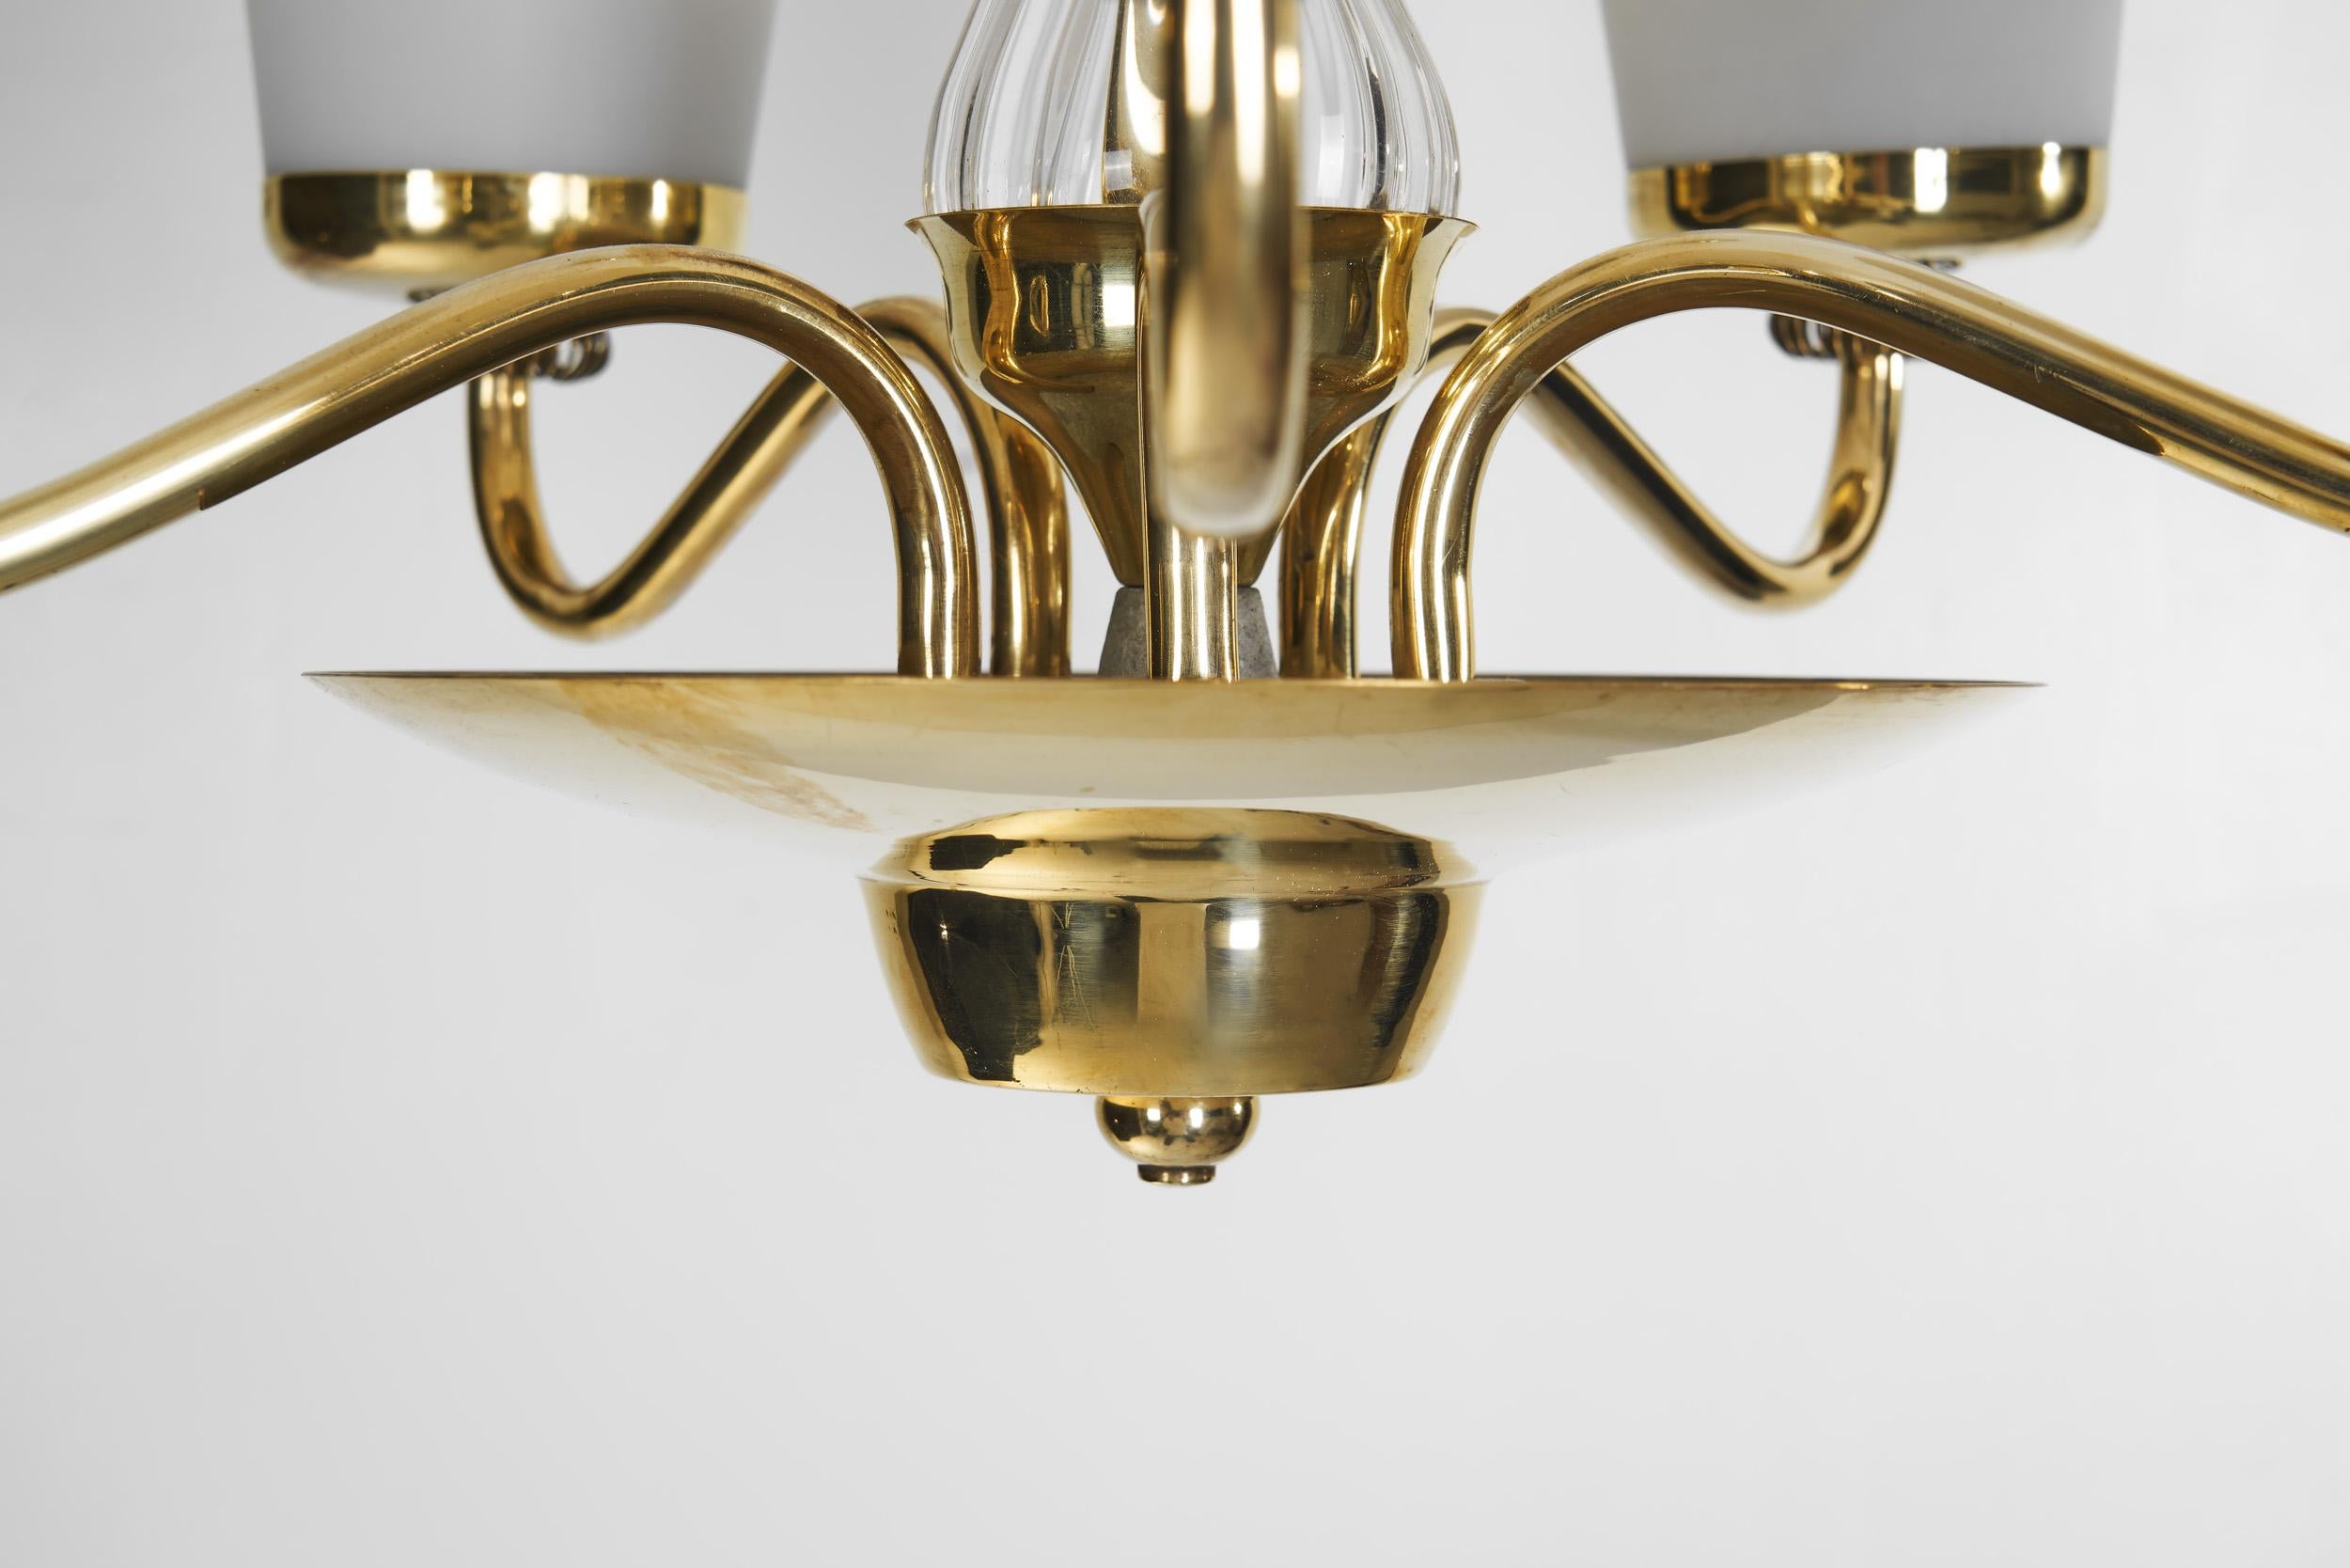 Finnish Brass and Opal Glass Chandelier by Saariston Valaisin, Finland ca 1950s For Sale 9